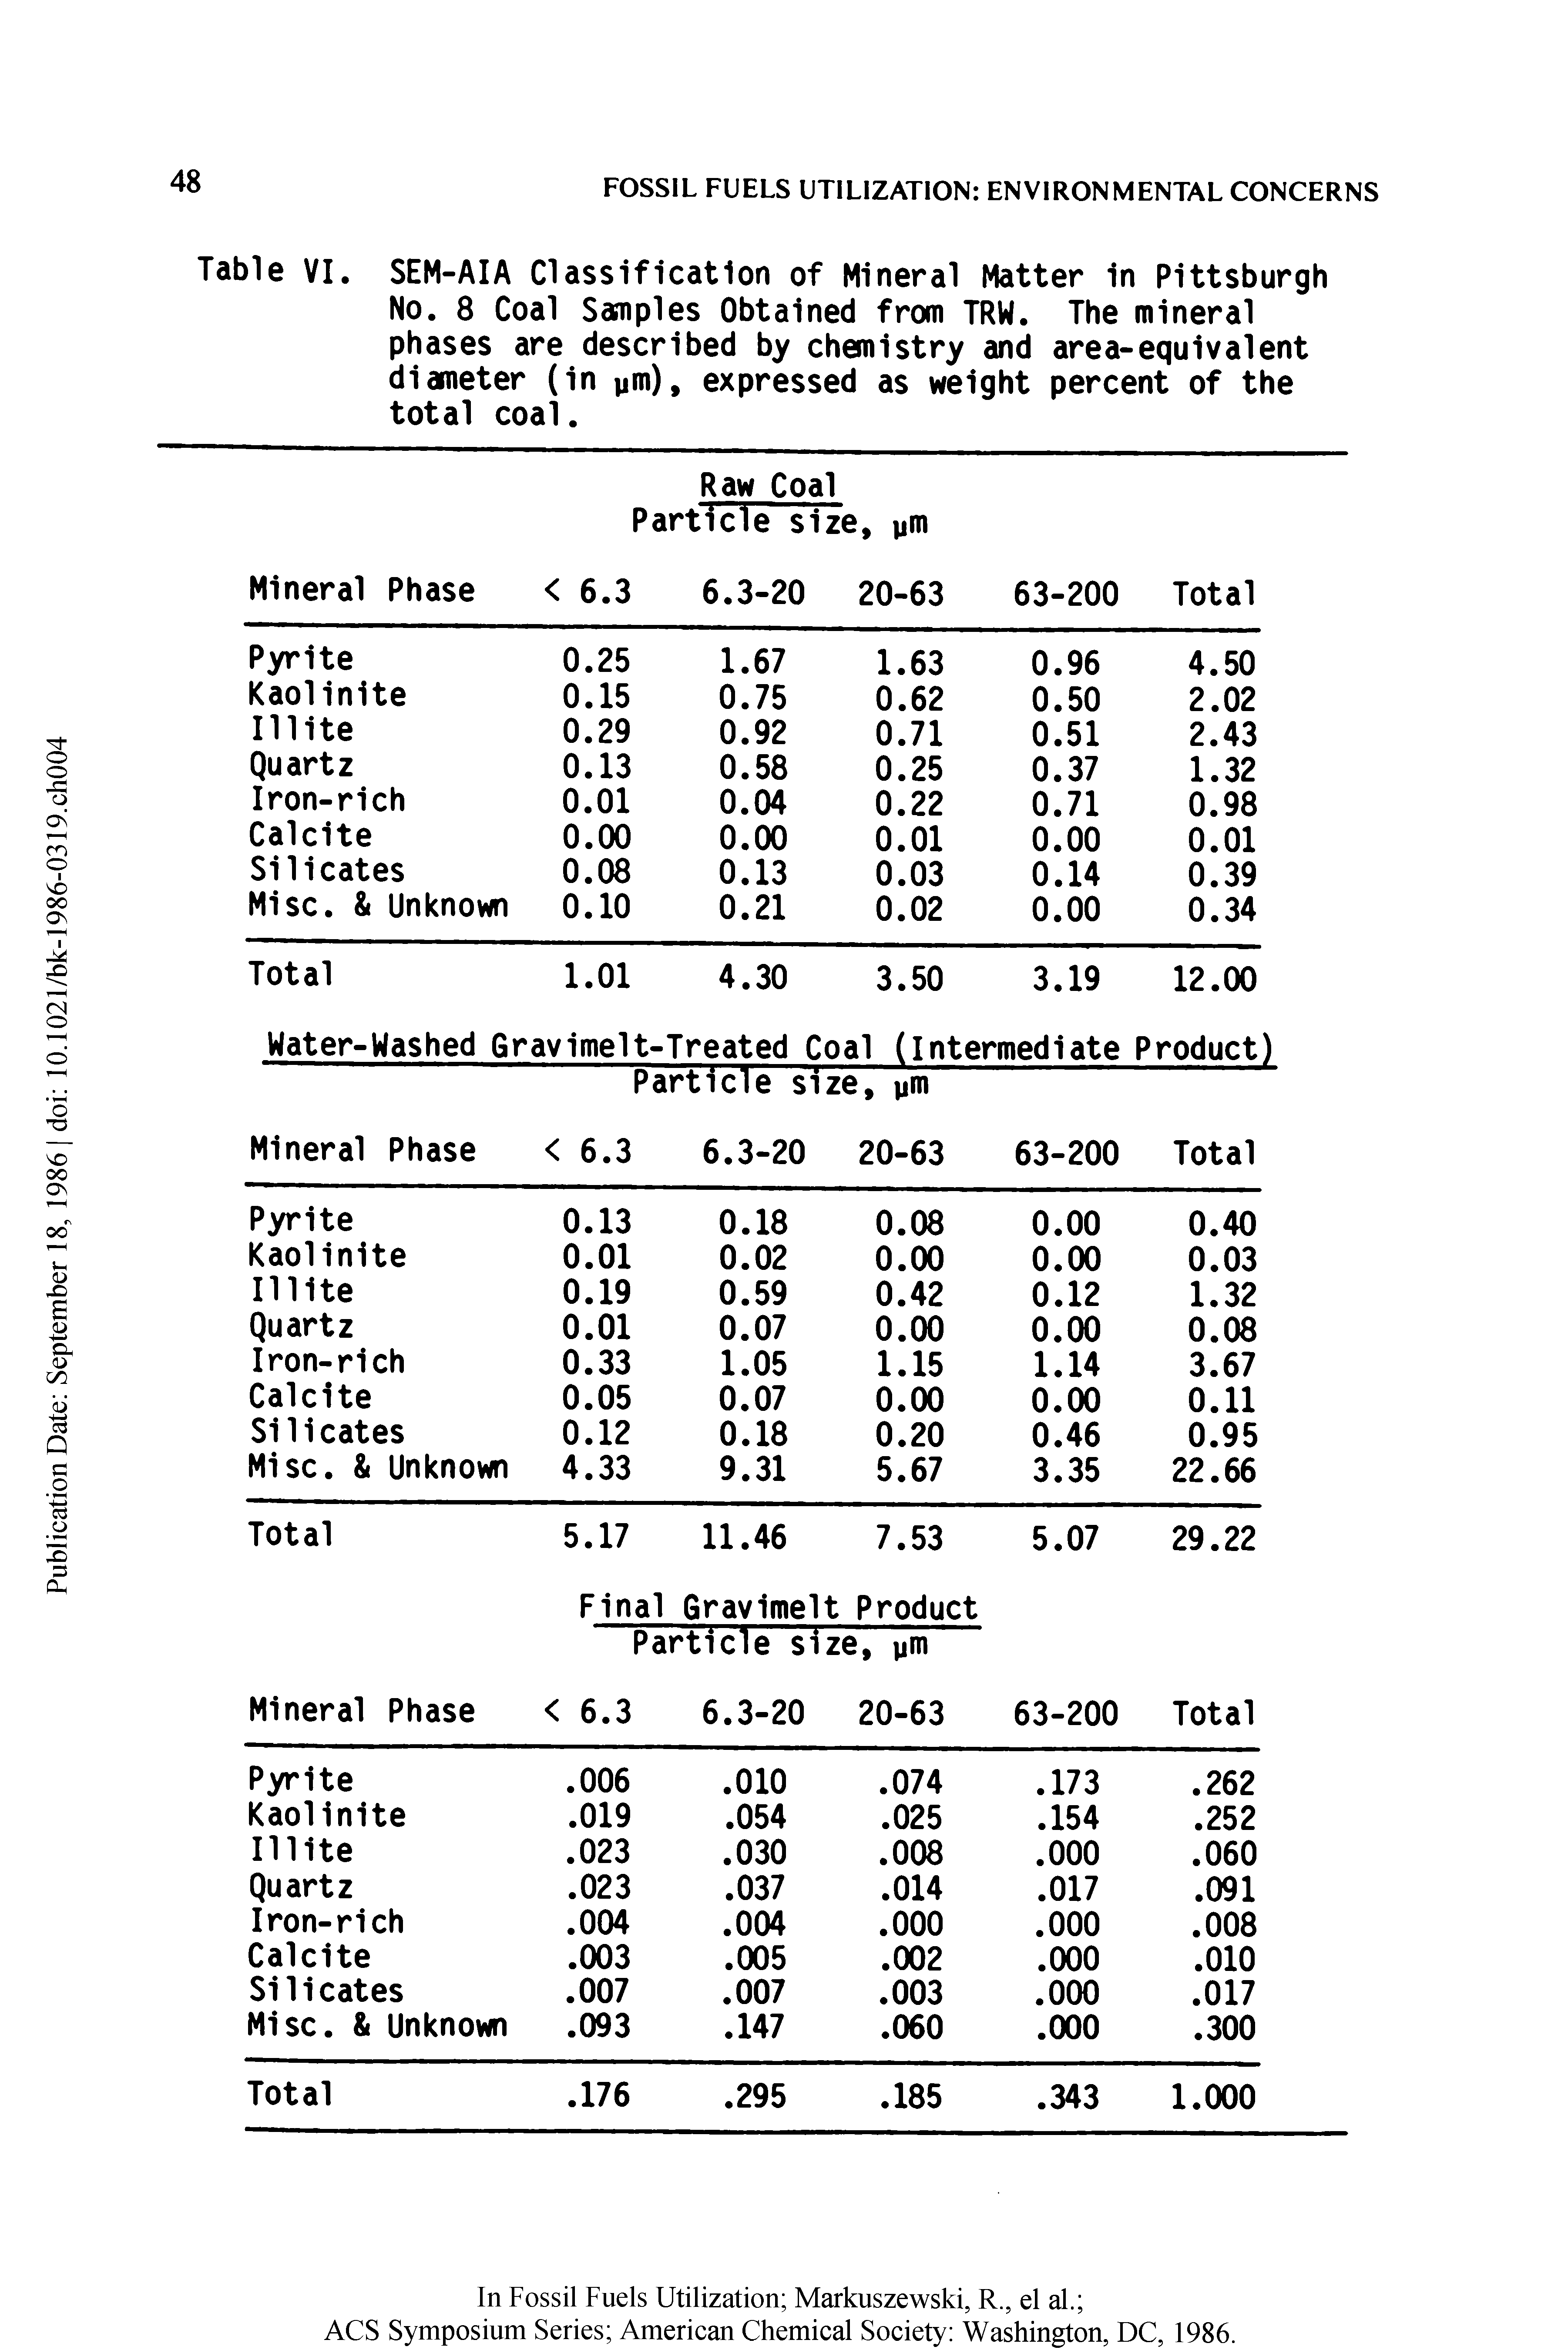 Table VI. SEM-AIA Classification of Mineral Matter in Pittsburgh No. 8 Coal Samples Obtained from TRW. The mineral phases are described by chemistry and area-equivalent diameter (in ym), expressed as weight percent of the total coal.